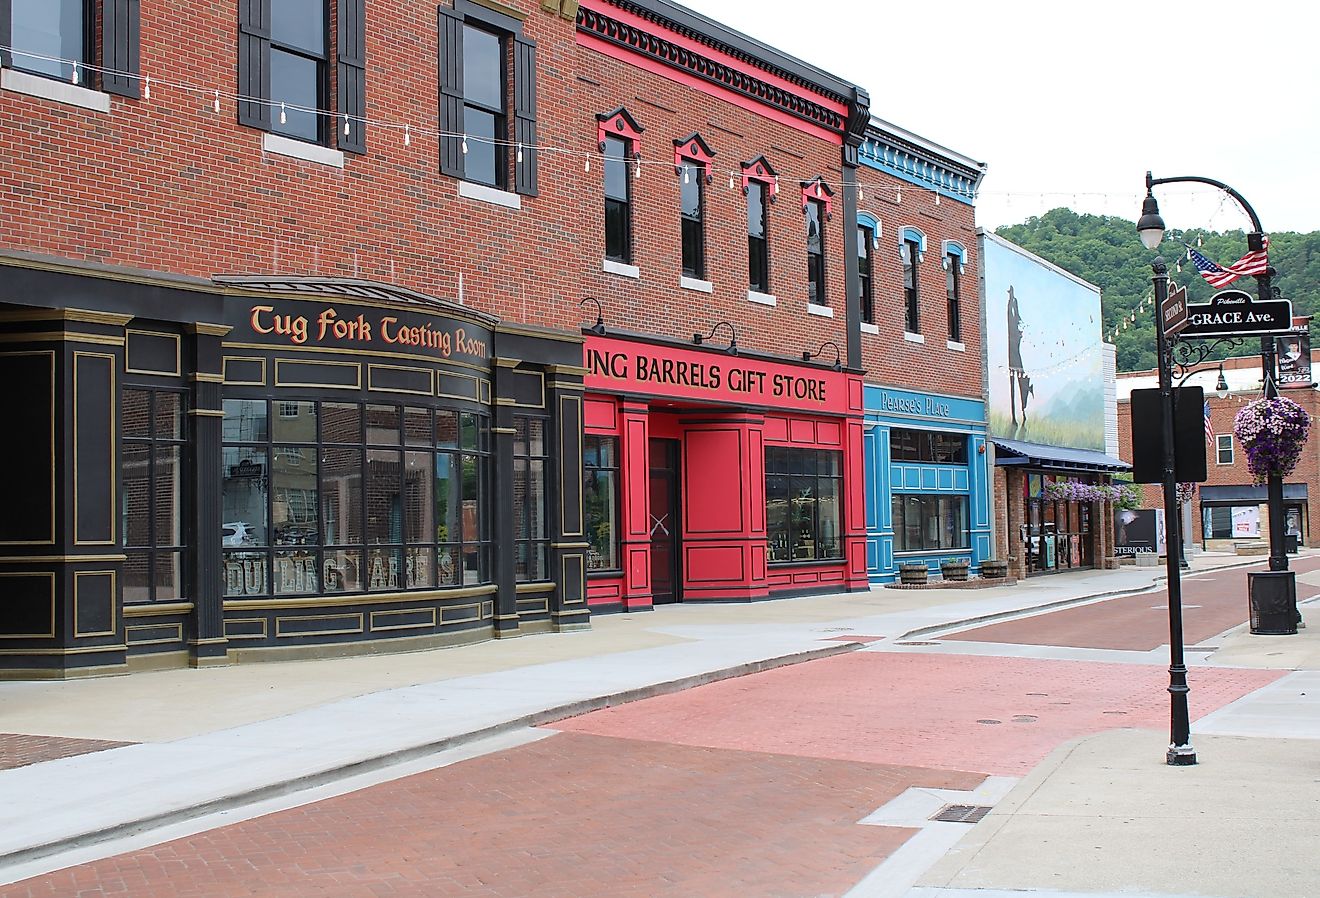 Colorful storefronts in downtown Pikeville, Kentucky. Image credit Cody Thane Prater via Shutterstock